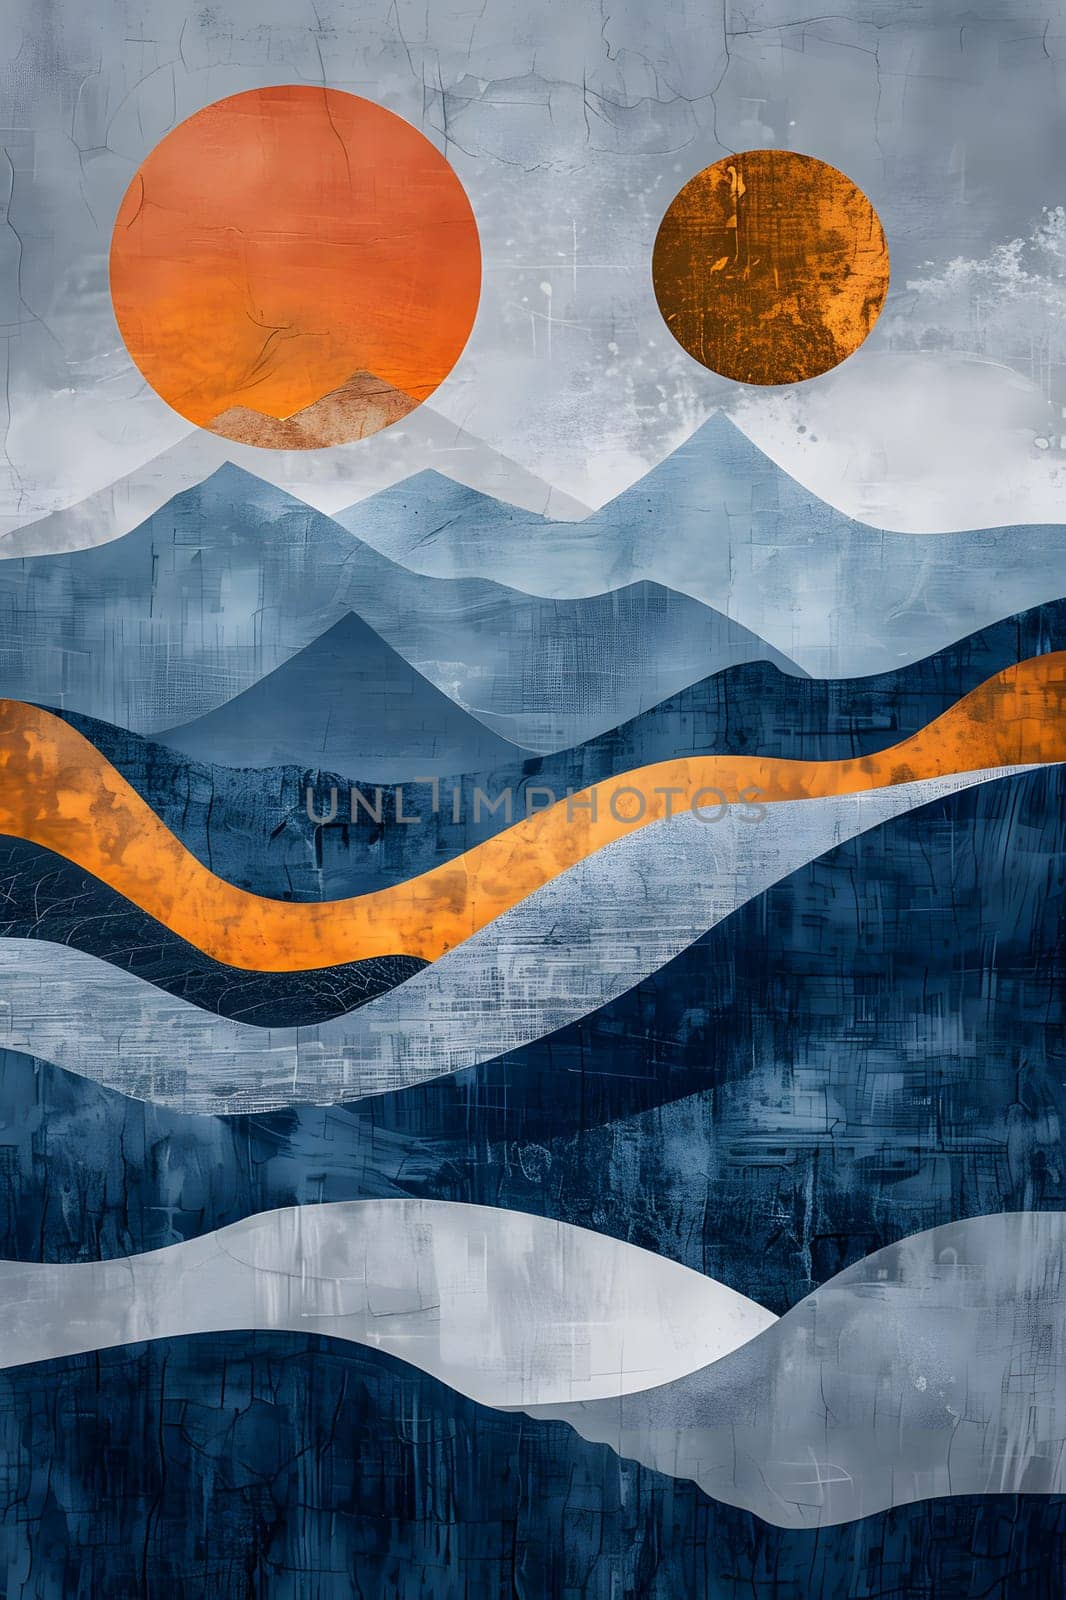 A painting of an ecoregion landscape with azure skies, orange suns, mountain peaks, waves, and cloud patterns. A unique art piece featuring a surreal dual sun setting